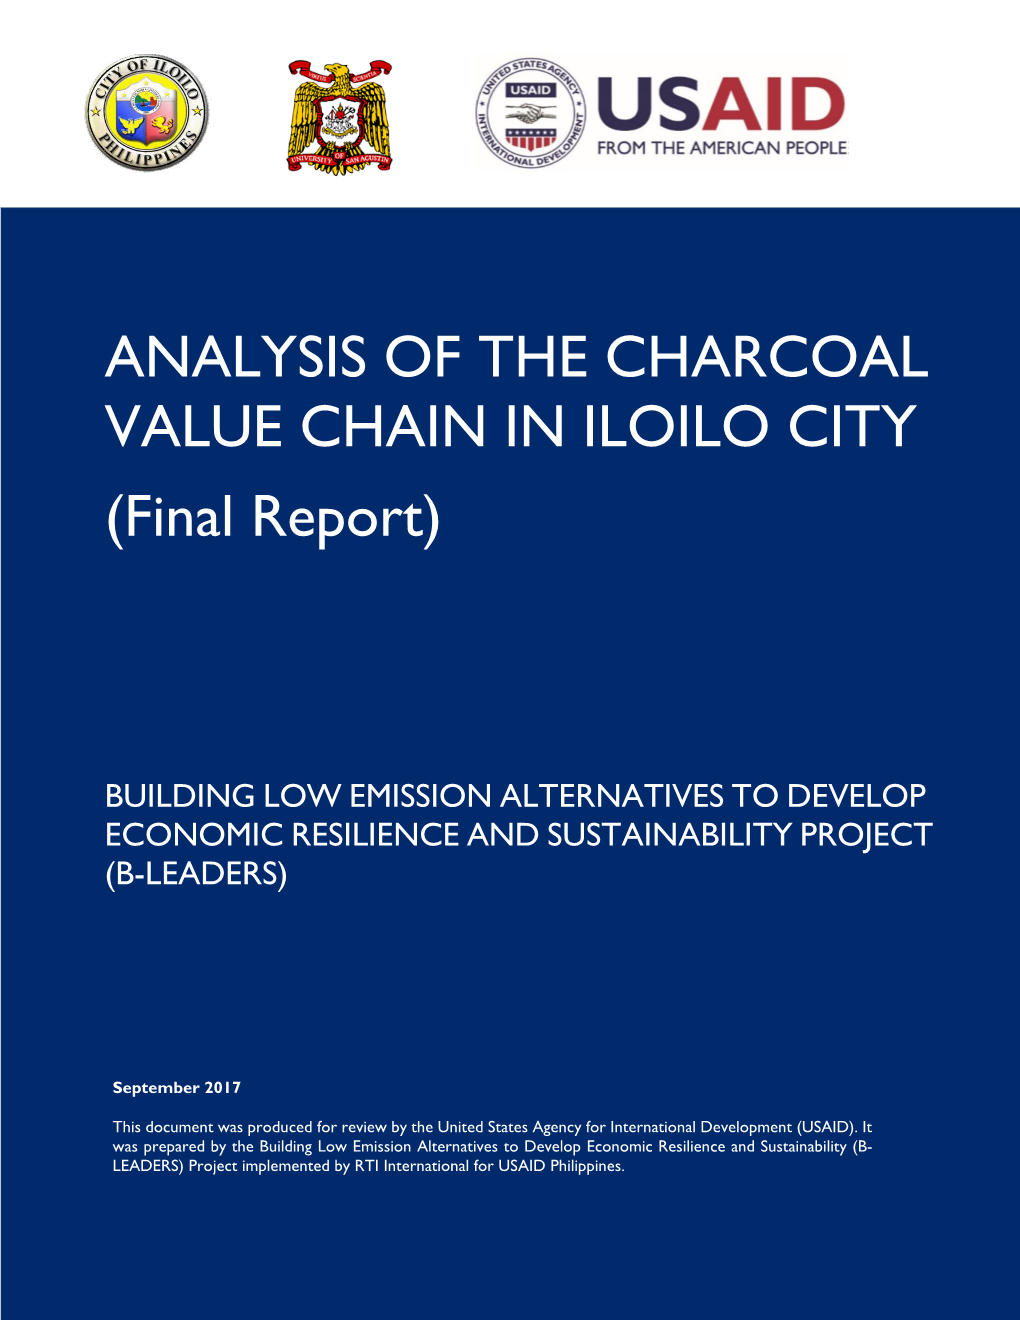 ANALYSIS of the CHARCOAL VALUE CHAIN in ILOILO CITY (Final Report)